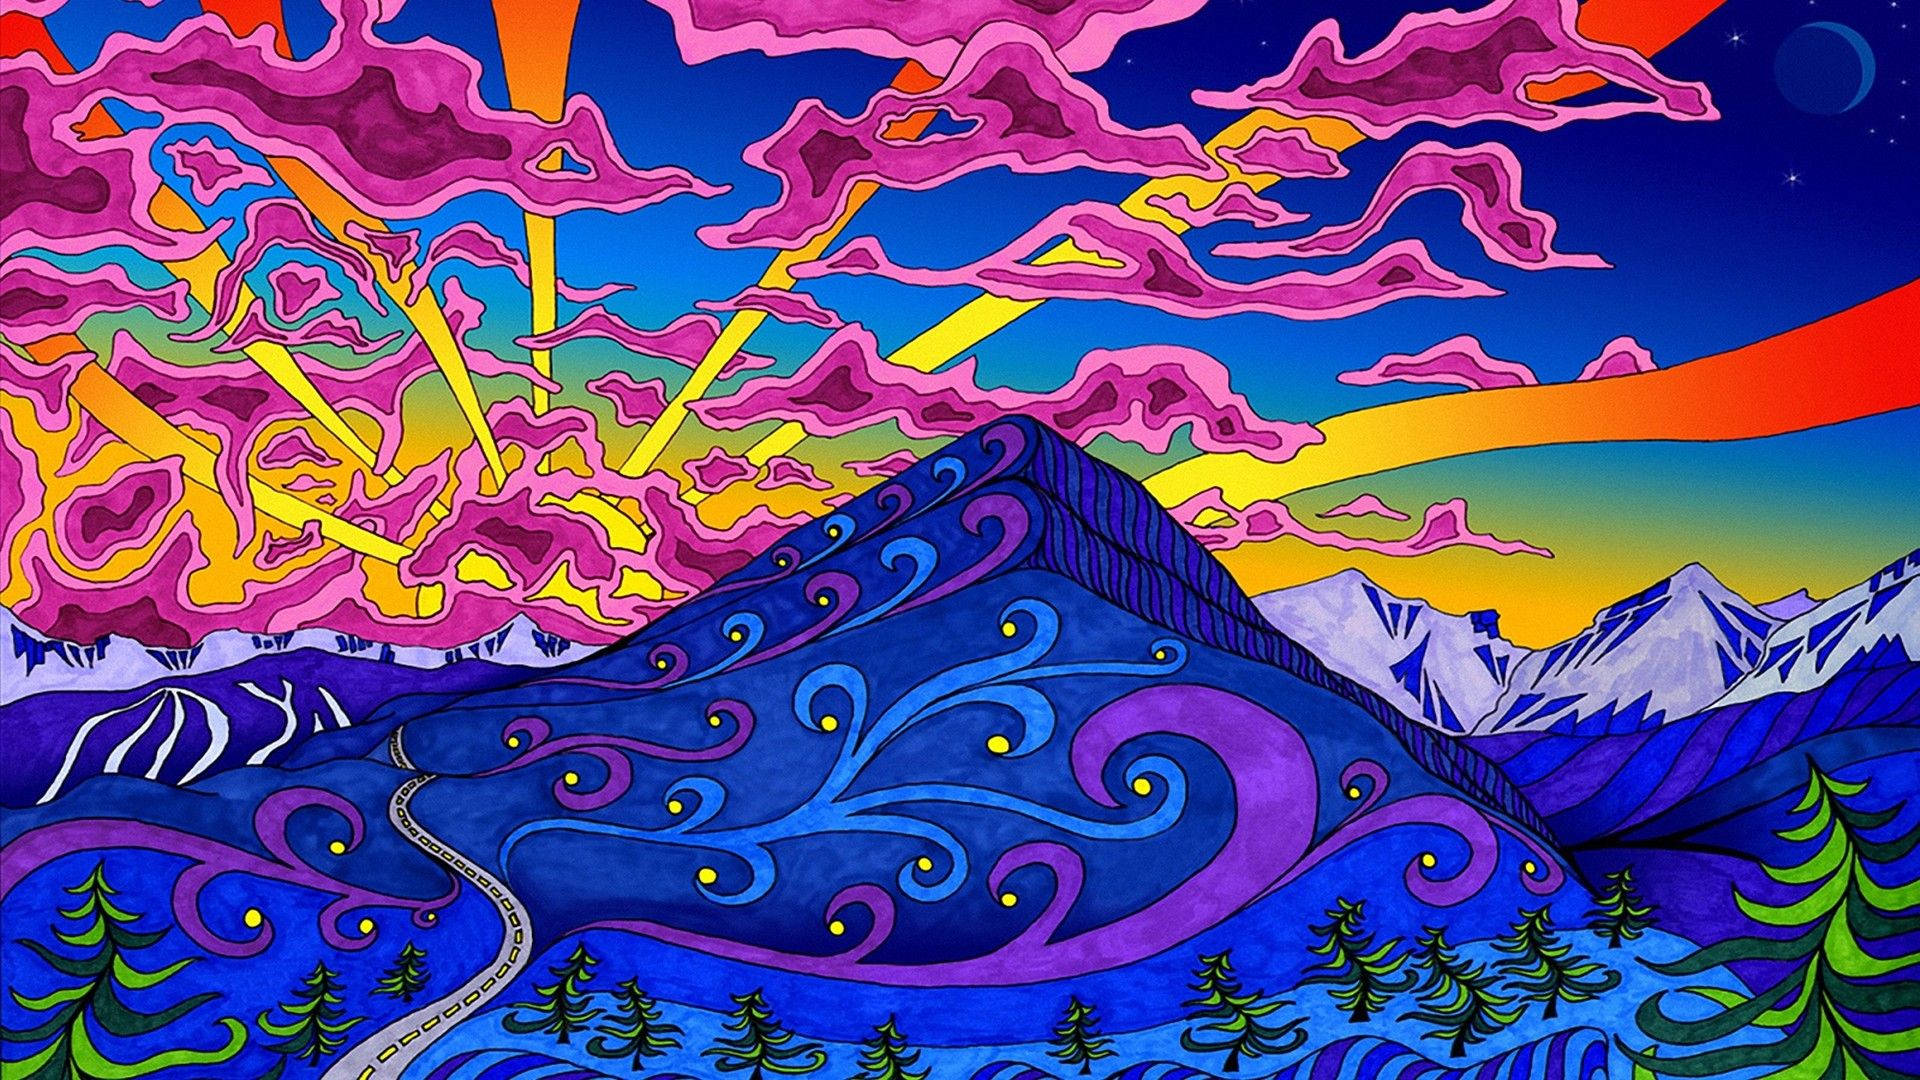 Free Psychedelic Wallpaper Downloads, [300+] Psychedelic Wallpapers for  FREE 